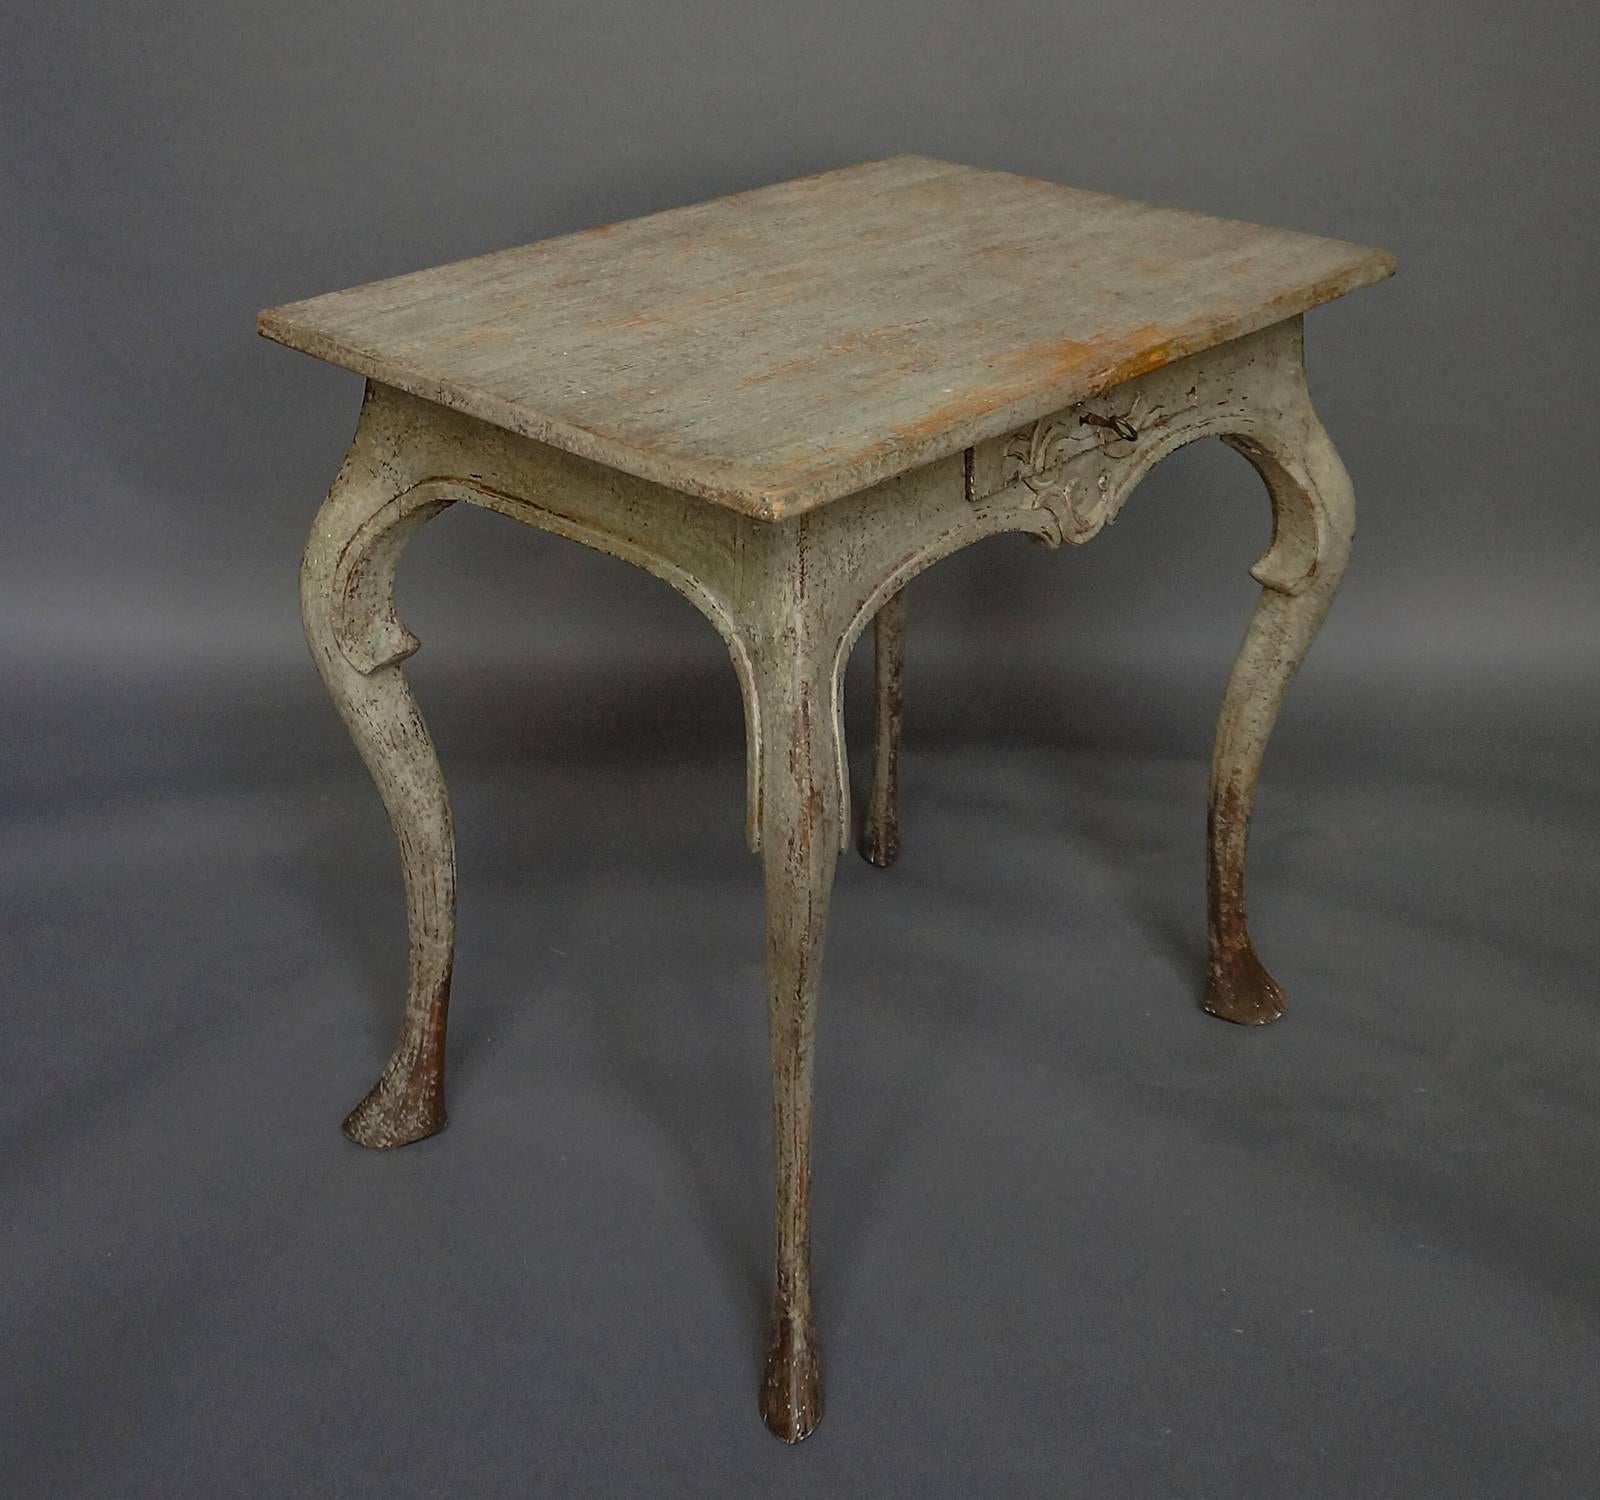 Hand-Carved Swedish Rococo Table in Original Paint